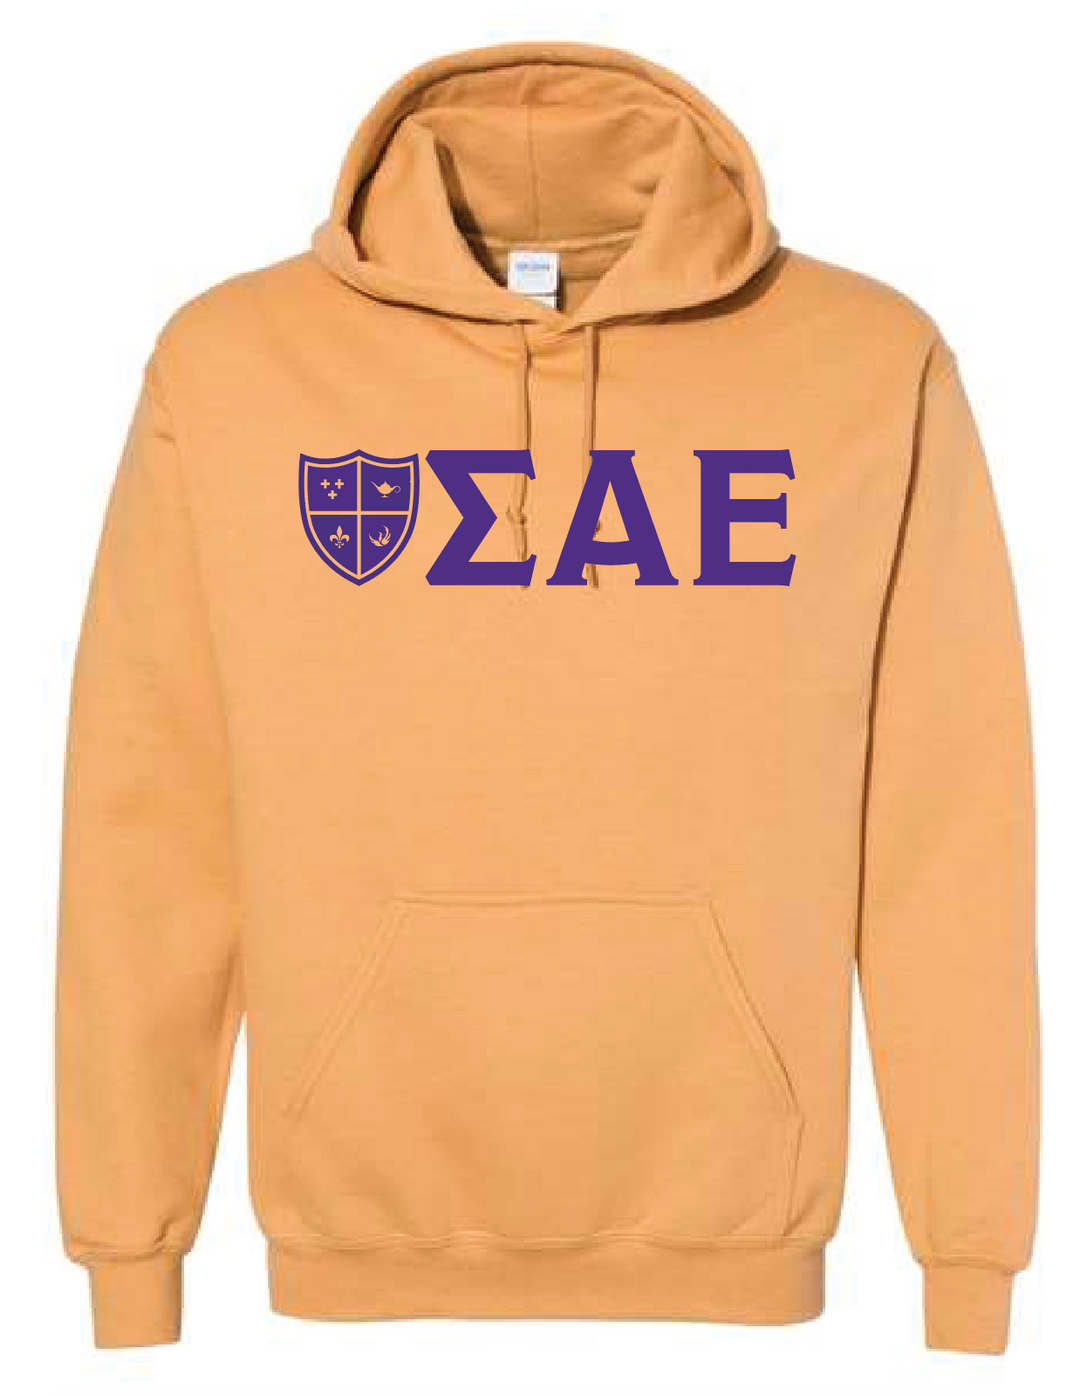 SAE Letters Hoodie in Old Gold - The Sigma Alpha Epsilon Store